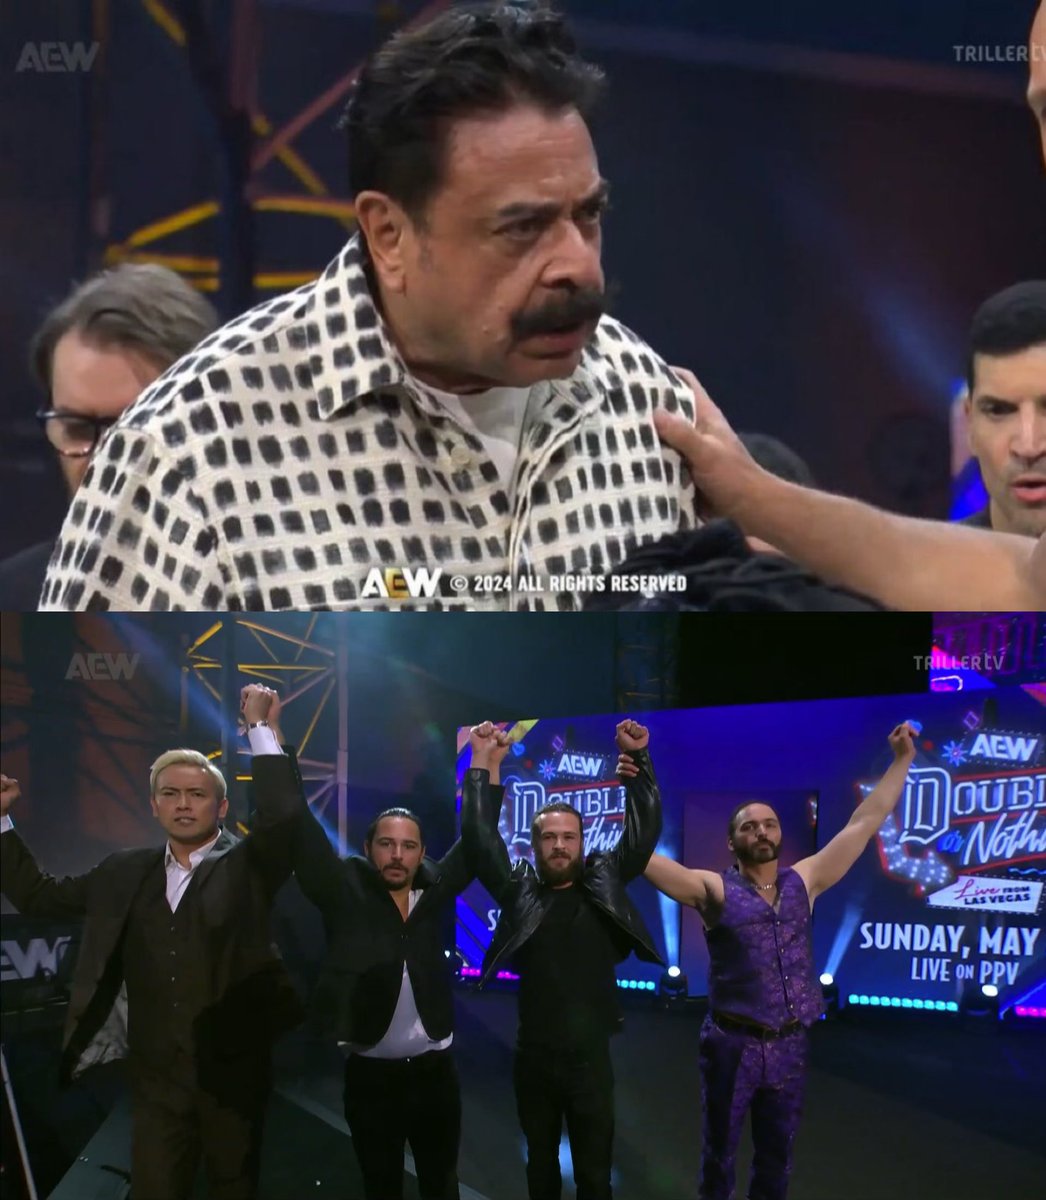 Shad Khan vs The Elite is going to be the Feud of the Year!🔥🔥🔥🙌🏽 #AEWDynamite